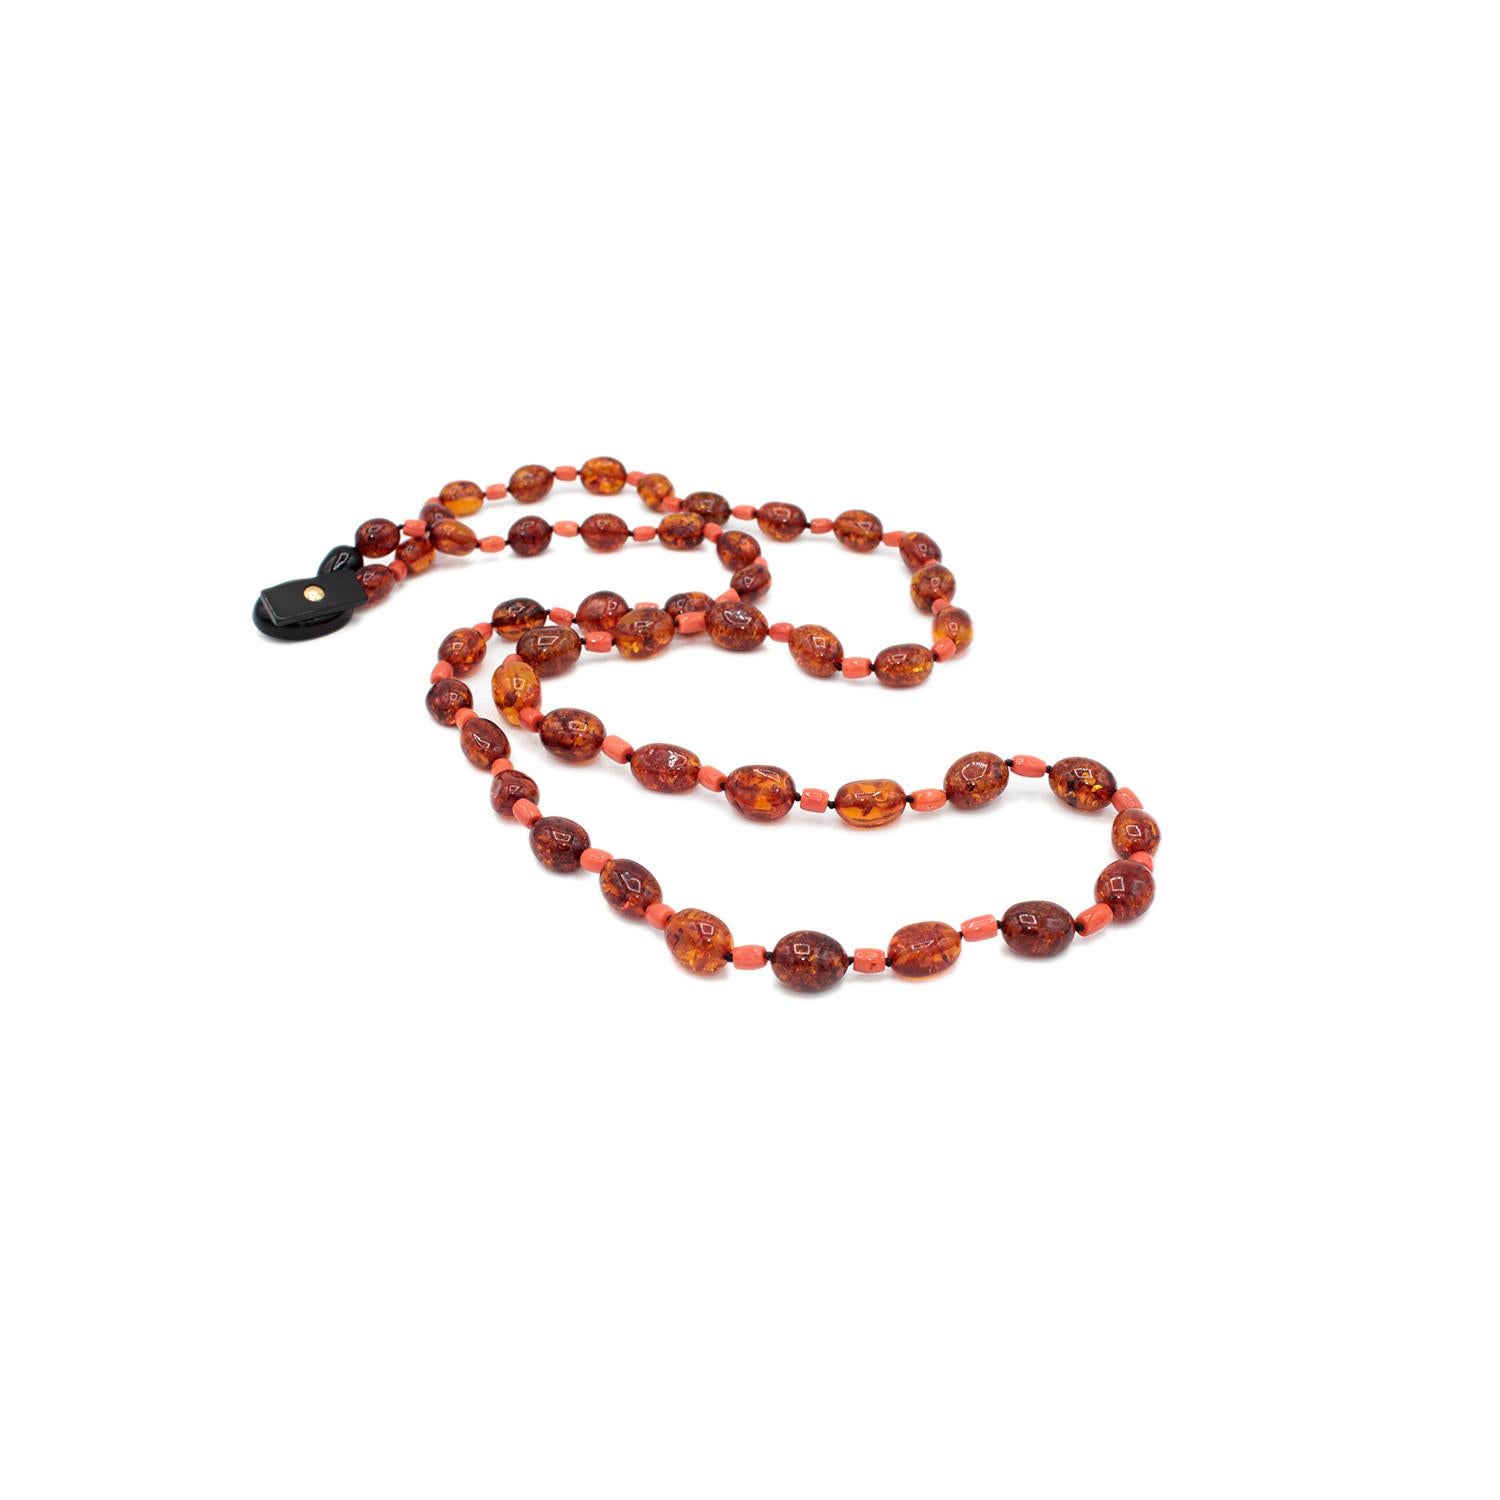 A necklace realized in Natural amber, red coral and bakelite clasp
Red Mediterranean Coral (Corallium rubrum)
Natural Baltic Amber
Bakelite clasp
Total lenght cm 100 ( including clasp) 
